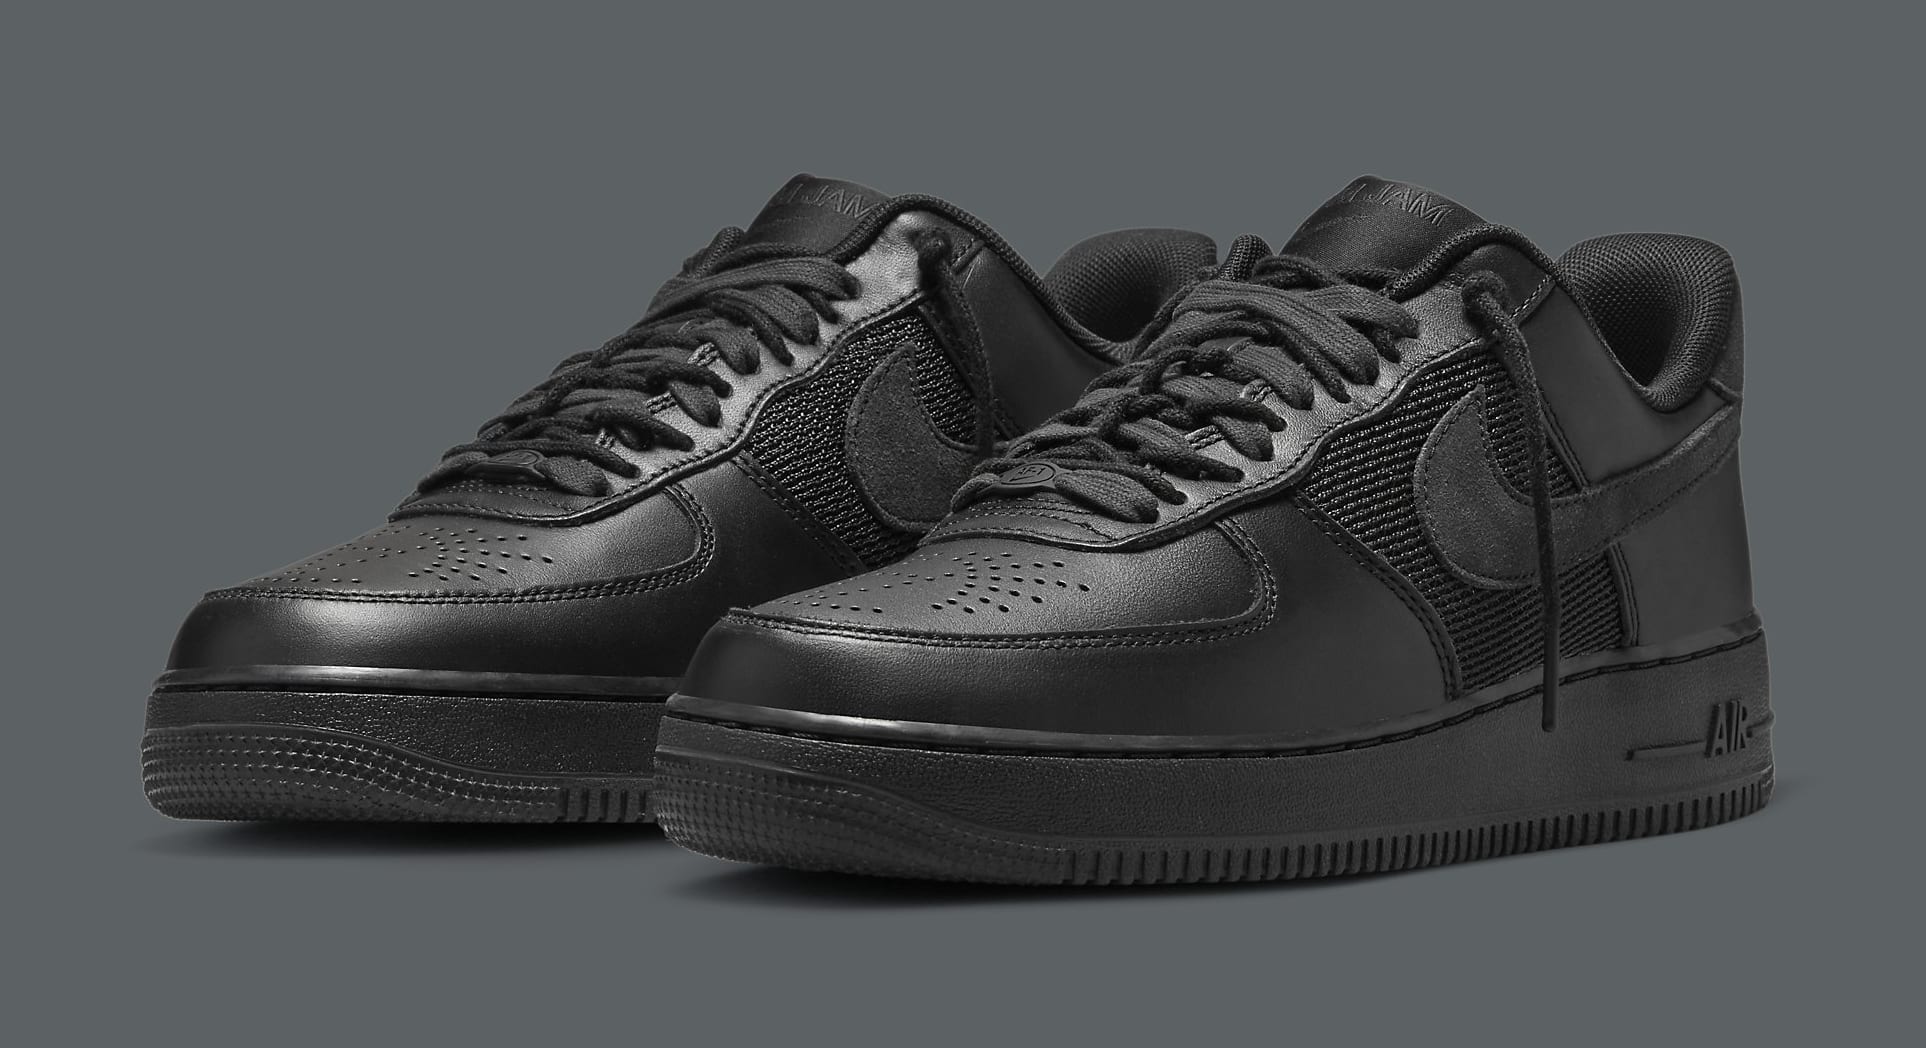 Slam Jam x Nike Air Force 1 Release Dates Confirmed | Complex